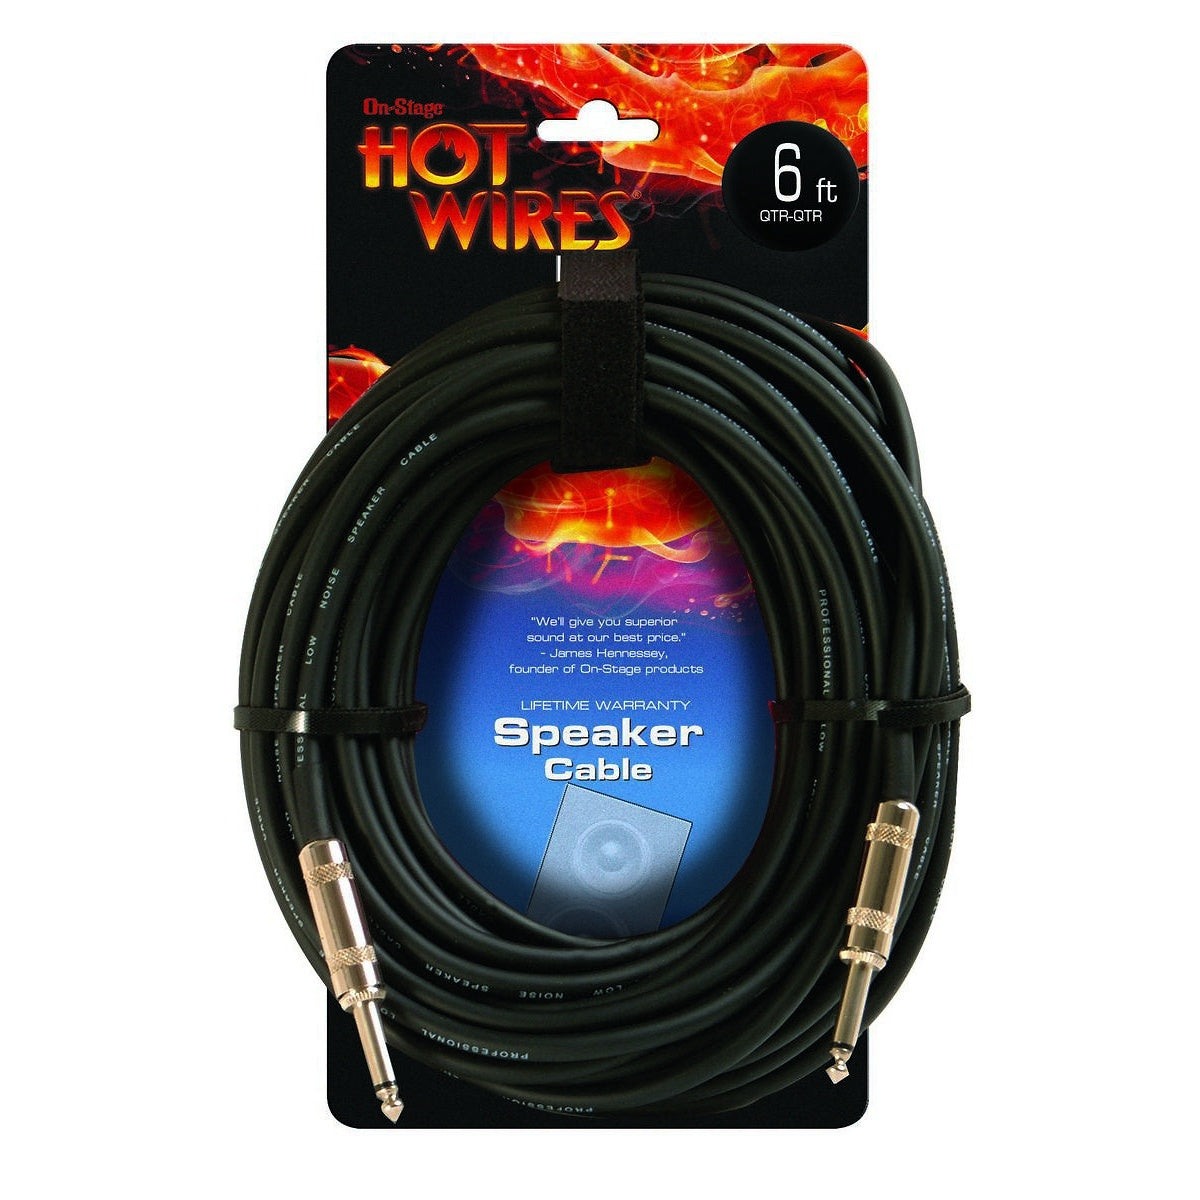 Hot Wires Speaker Cable, 6 Foot